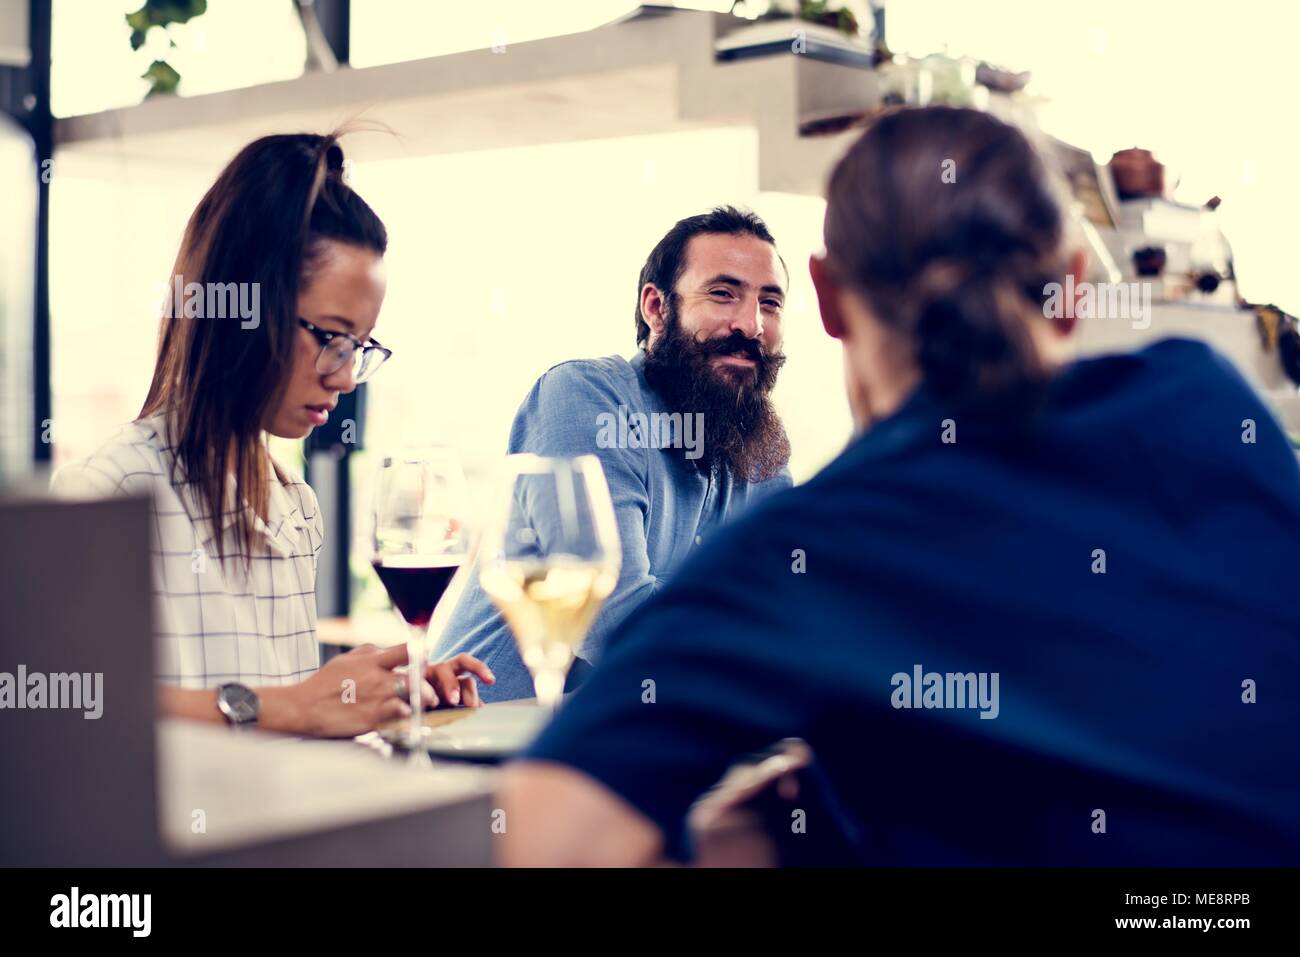 People having wine and talking with friends Stock Photo